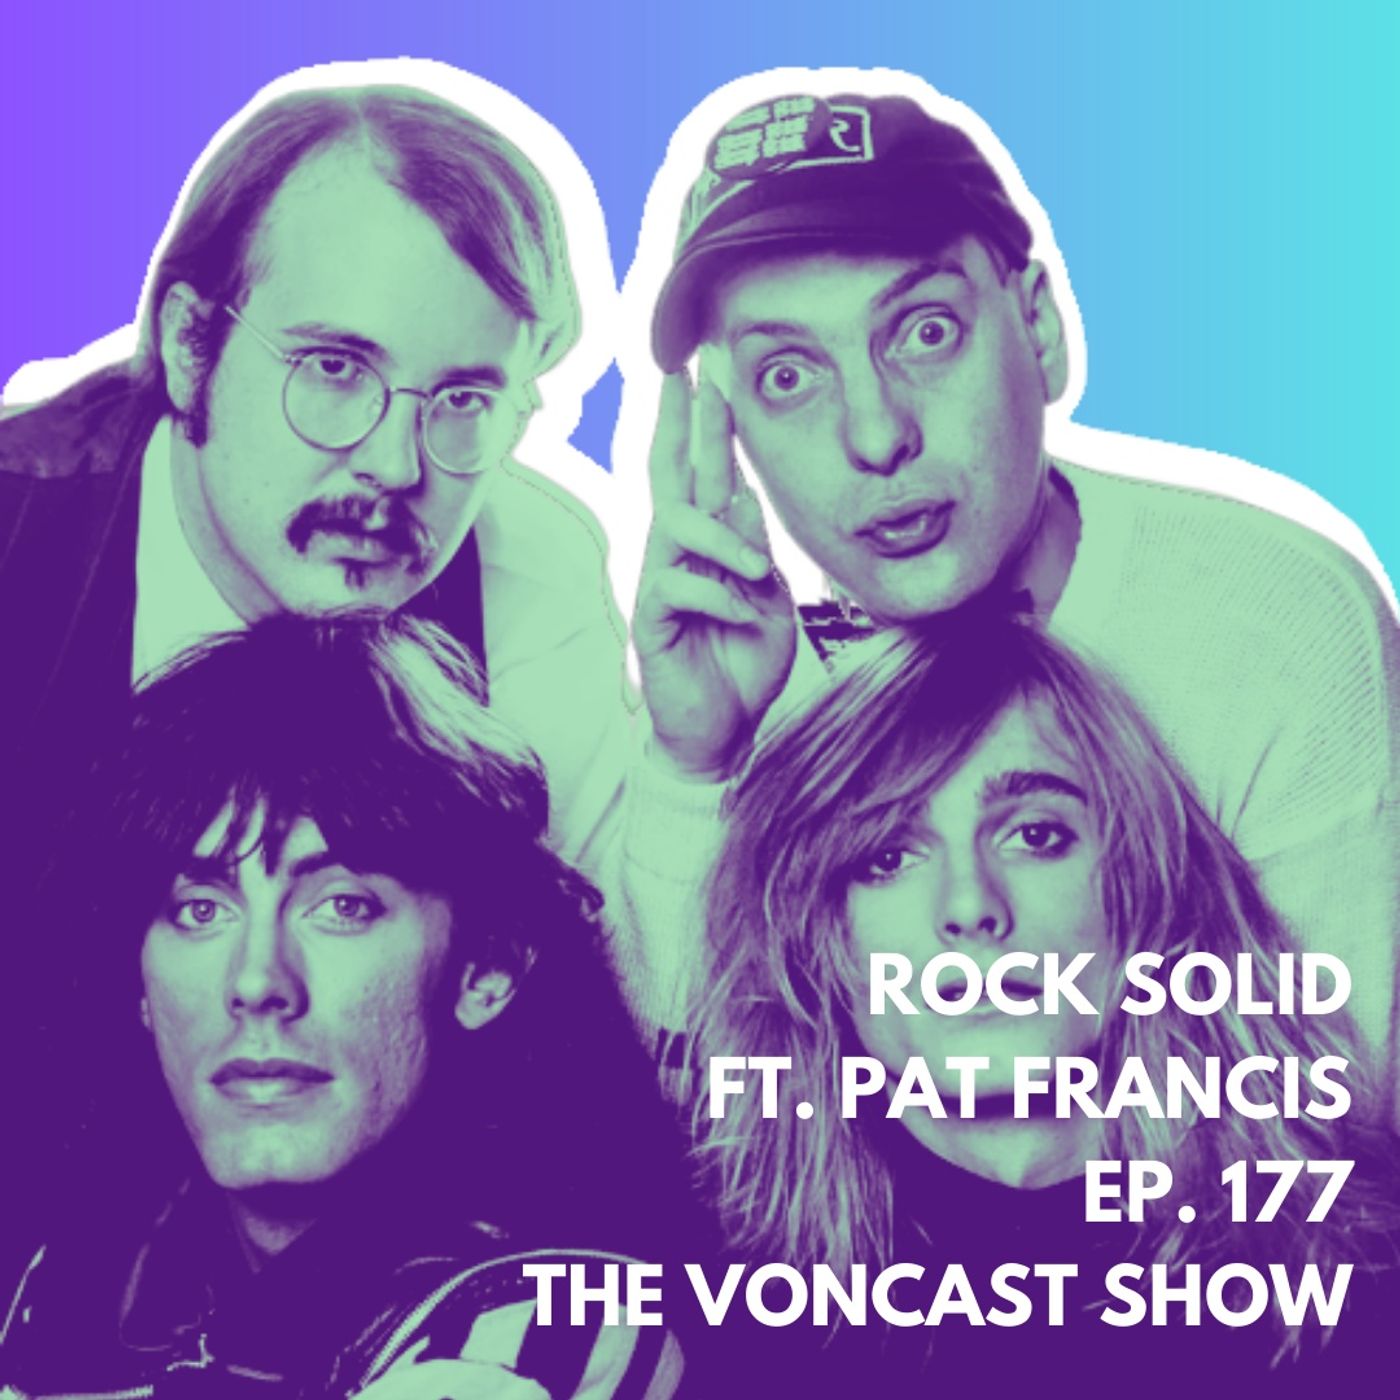 Ep. 177 Rock Solid ft. Pat Francis